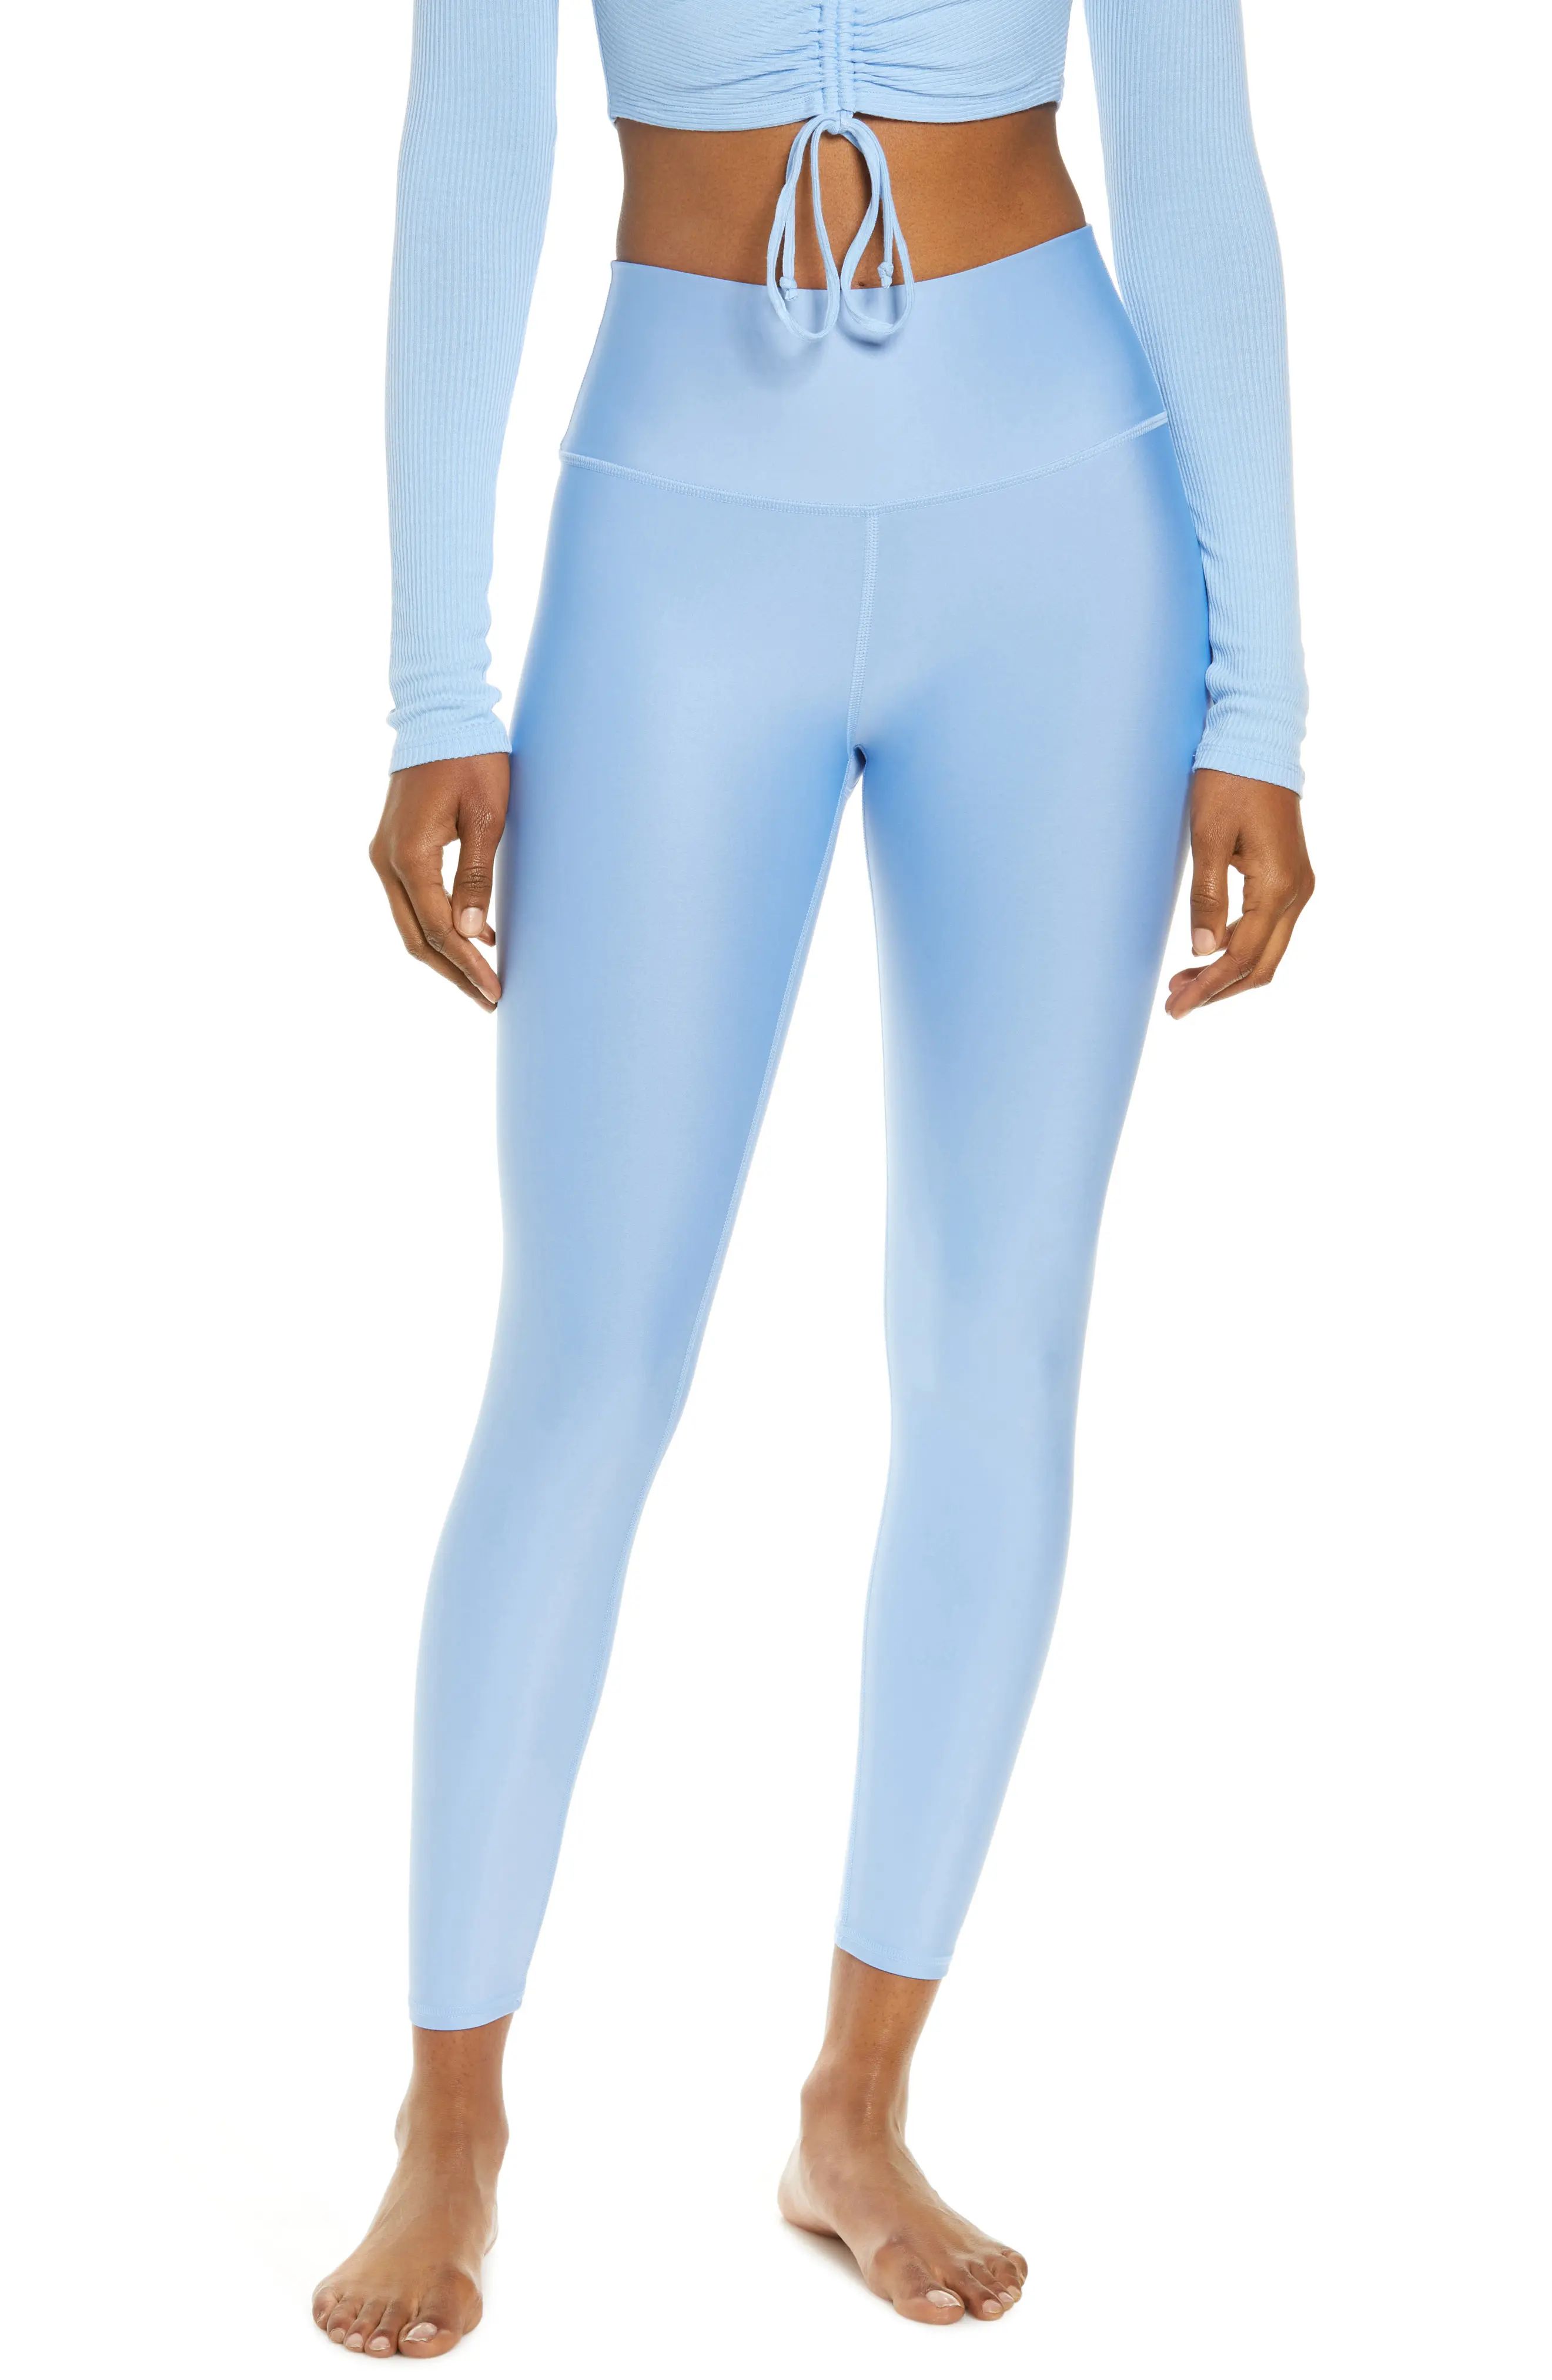 Alo Airlift High Waist Midi Leggings in Tile Blue at Nordstrom, Size X-Small | Nordstrom